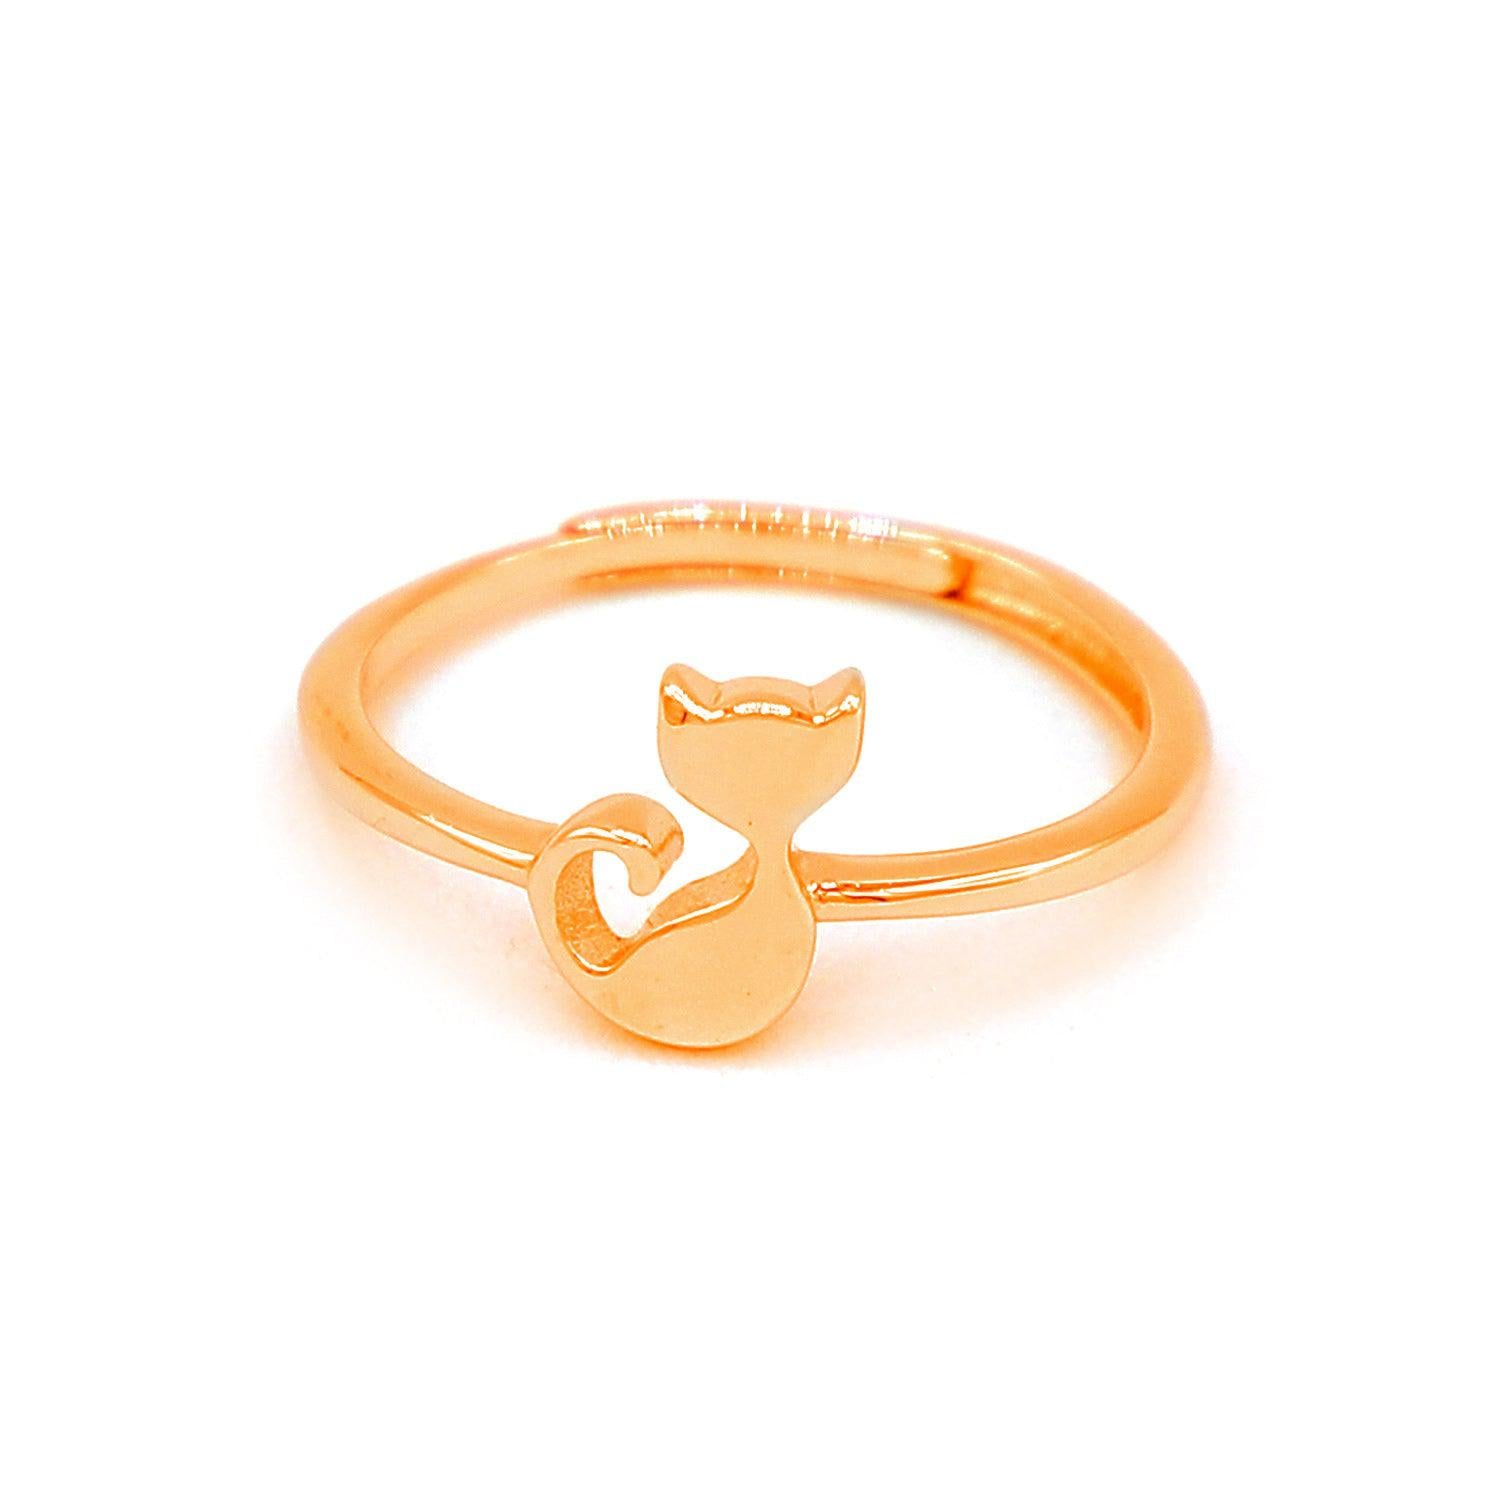 Adorable Cat Ring